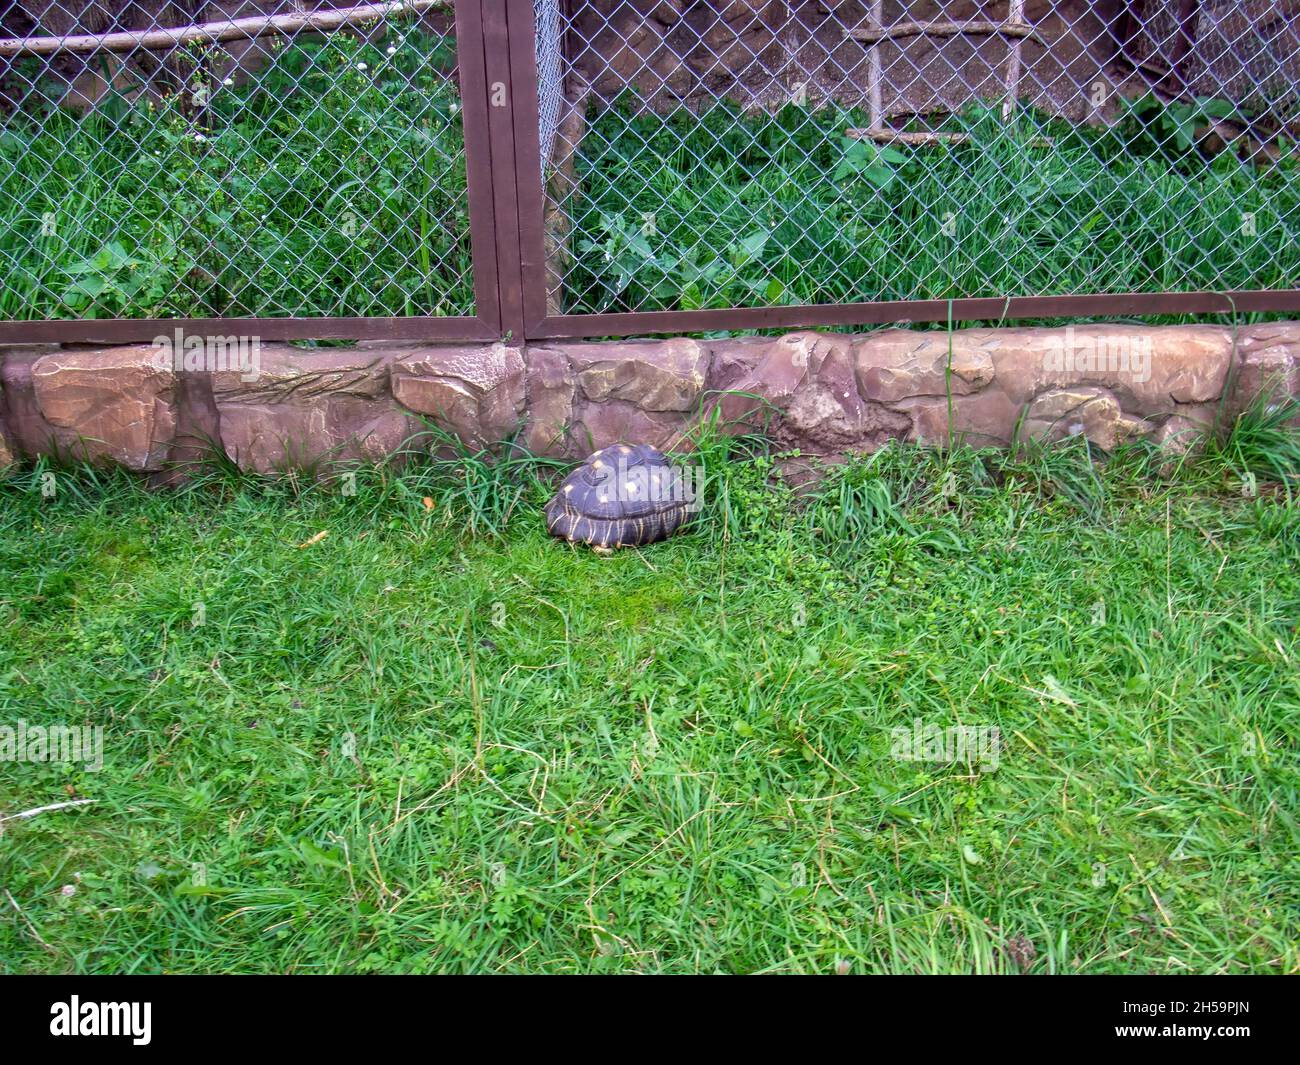 turtle sleeps on the grass in the zoo, in the summer Stock Photo